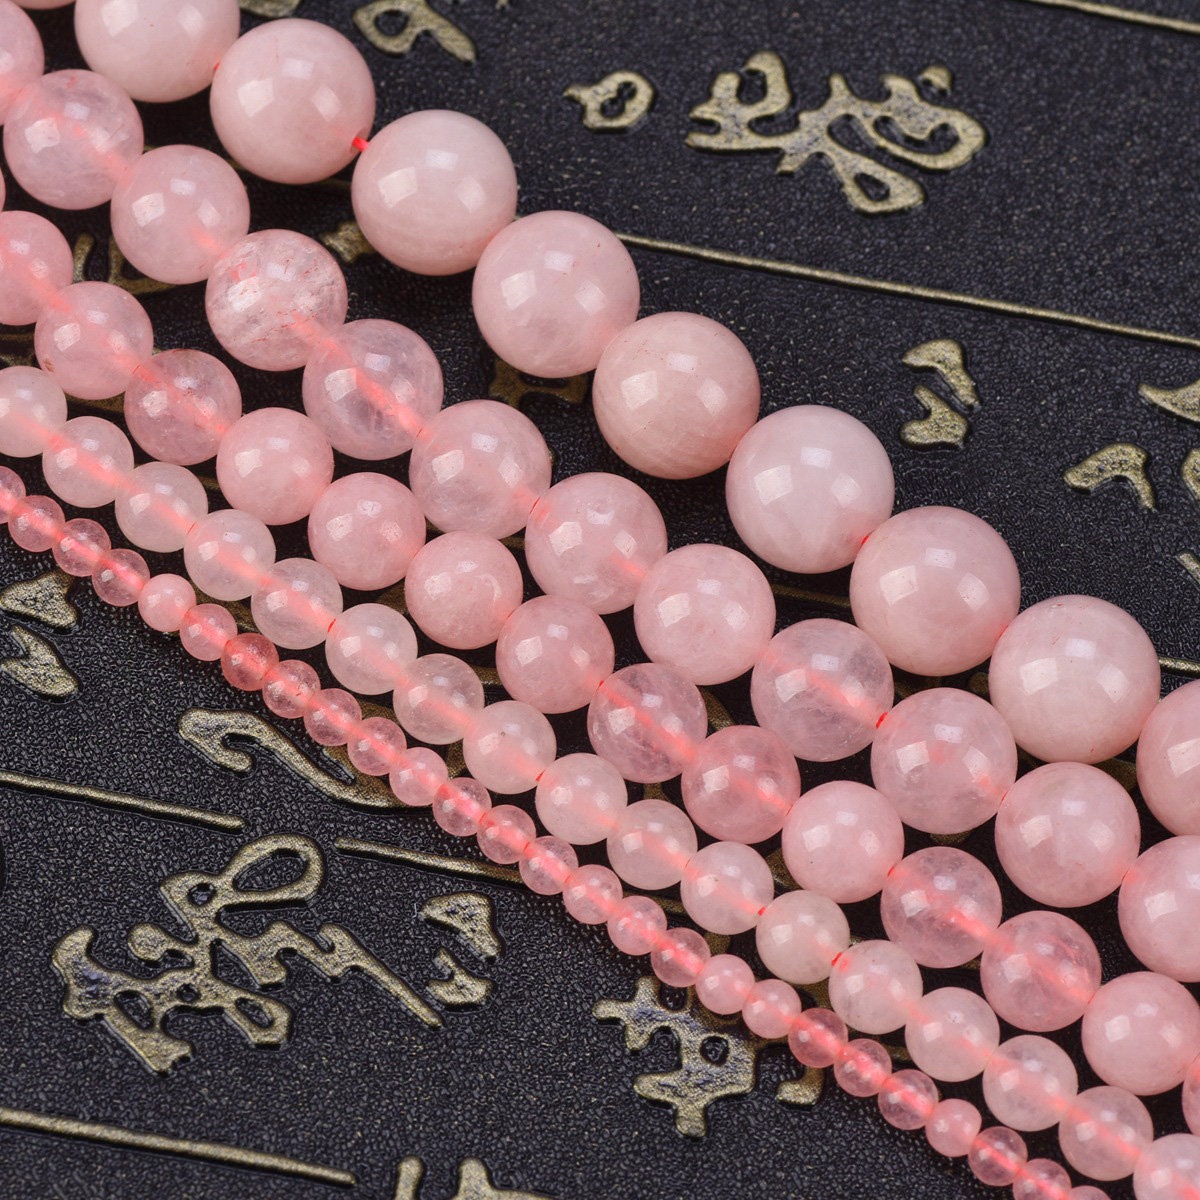 20Pcs Natural Gemstones Stone Big Hole Round Loose Beads 6mm 8mm 10mm 12mm 2mm 